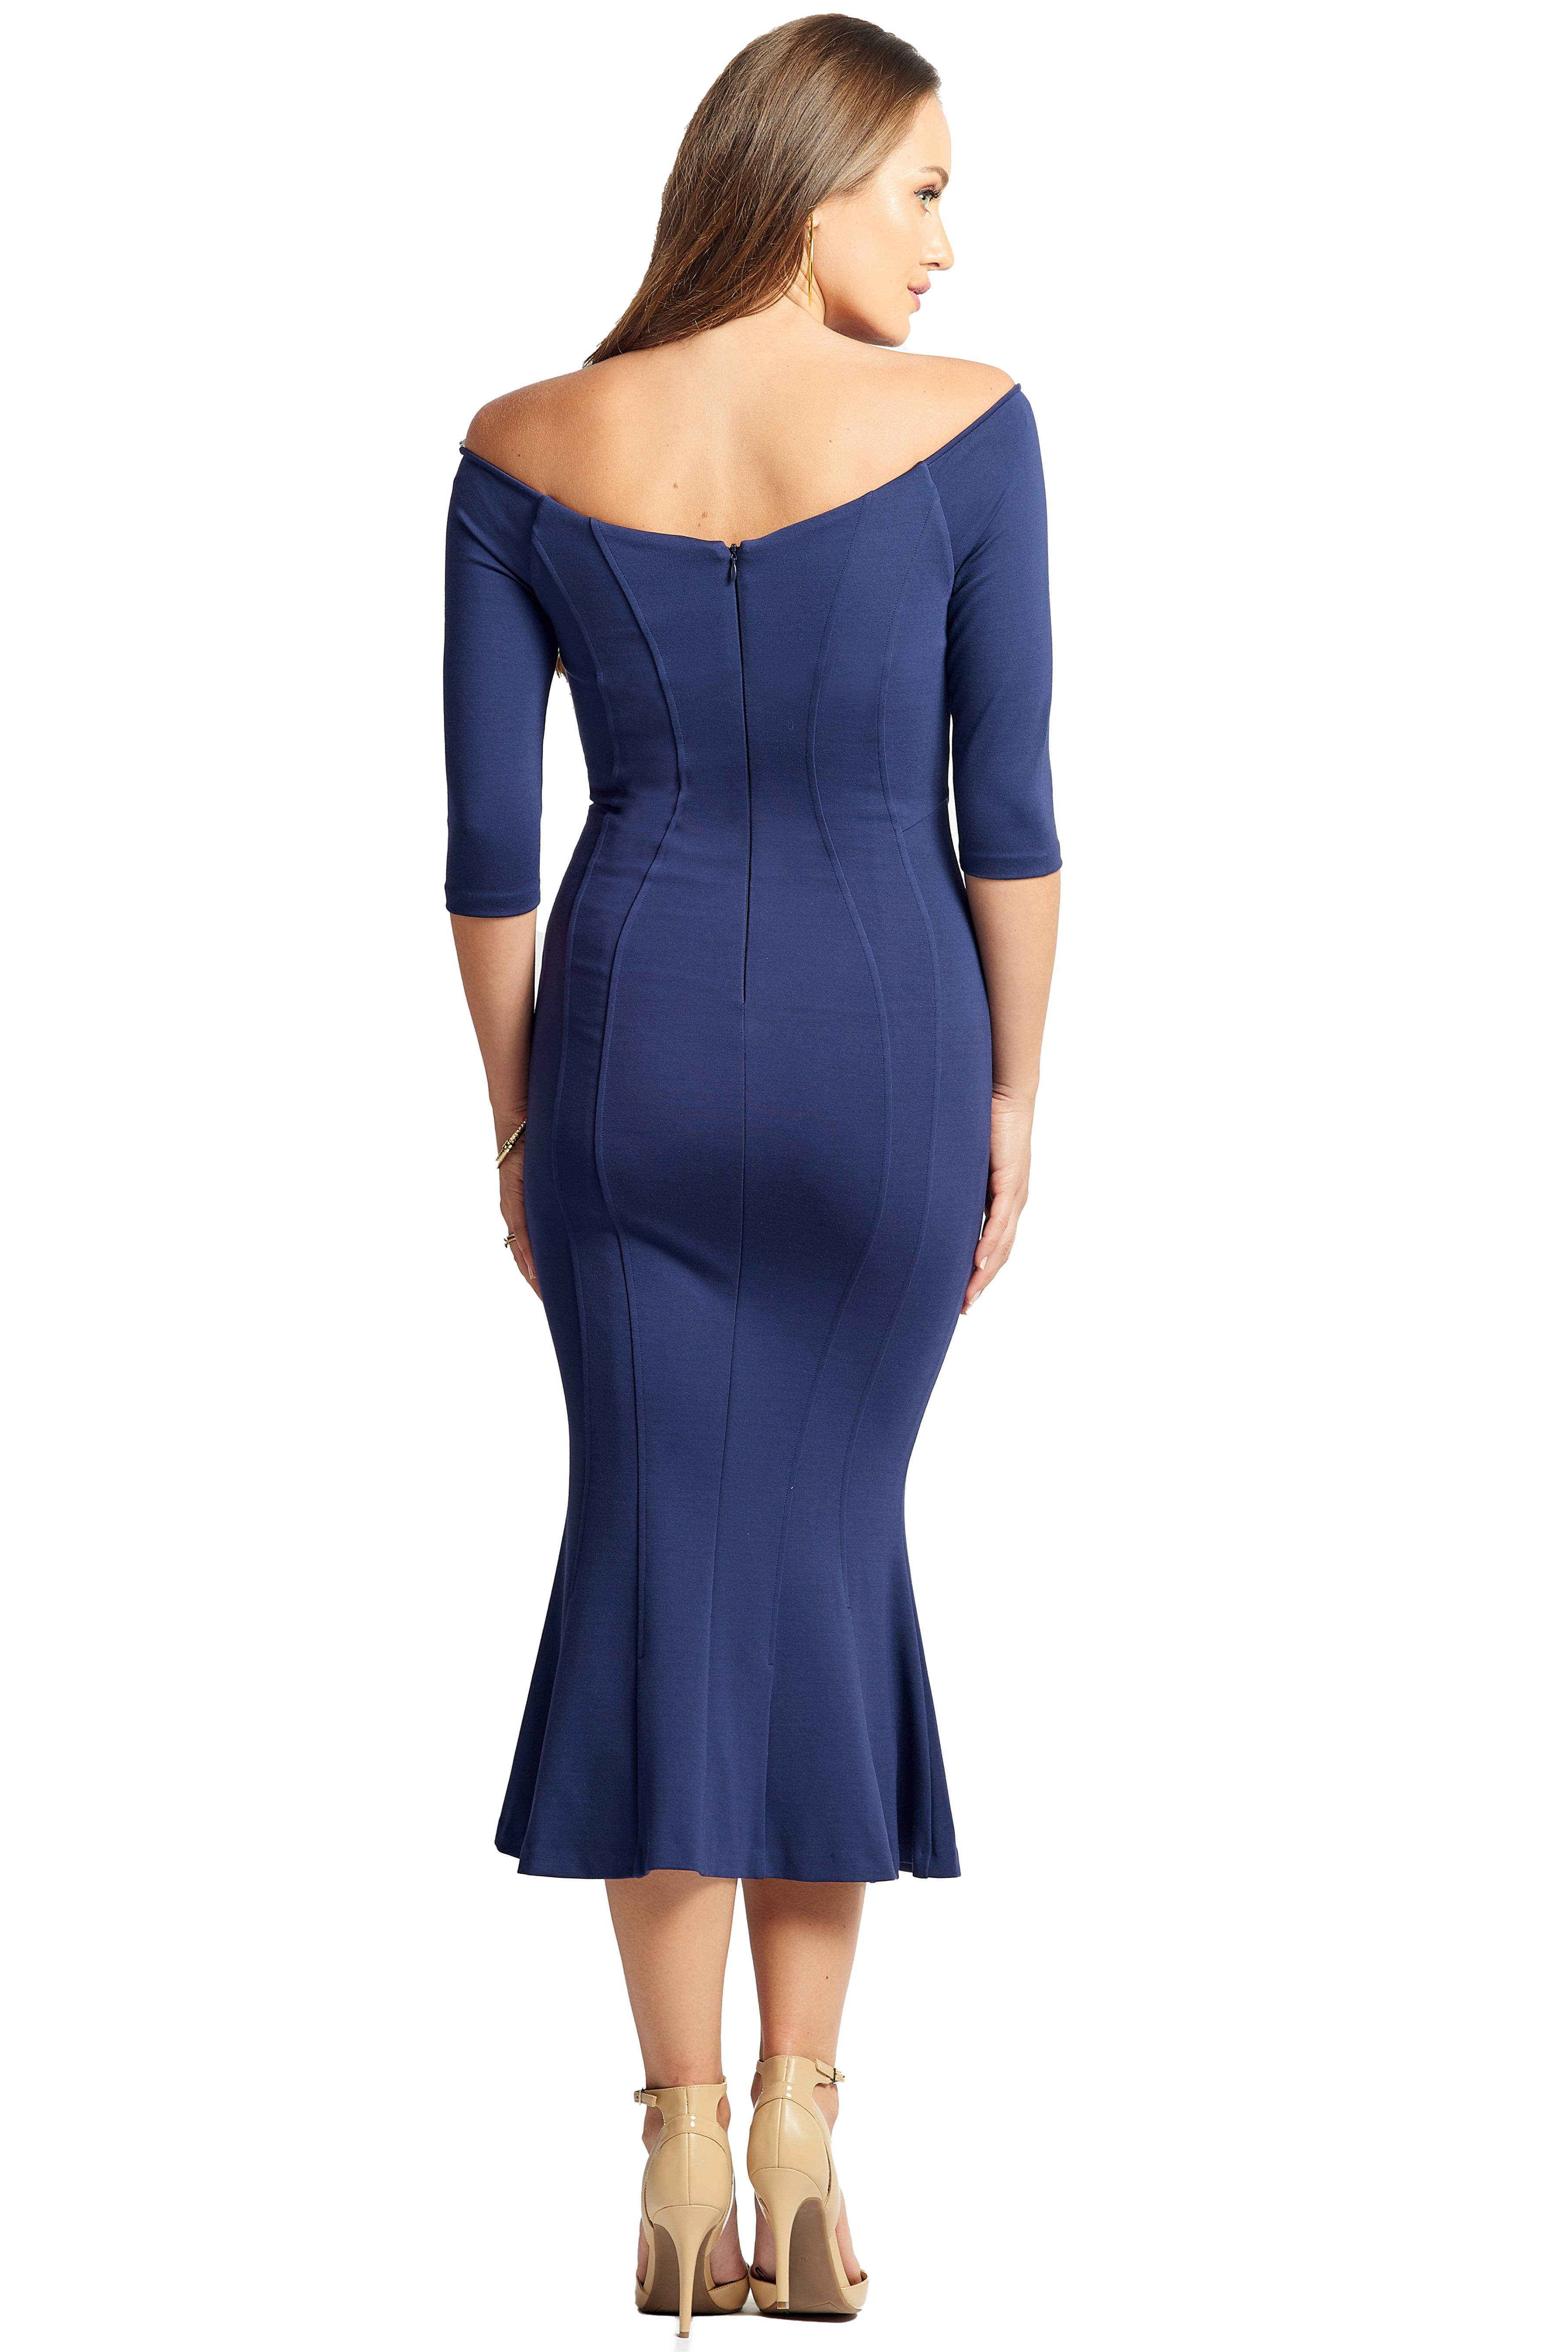 Back view of model wearing the Simona Maghen Raquel Dress, navy knit Ponte midi body con dress, with off the shoulder sweetheart neckline, 3/4 sleeves & mermaid hem.